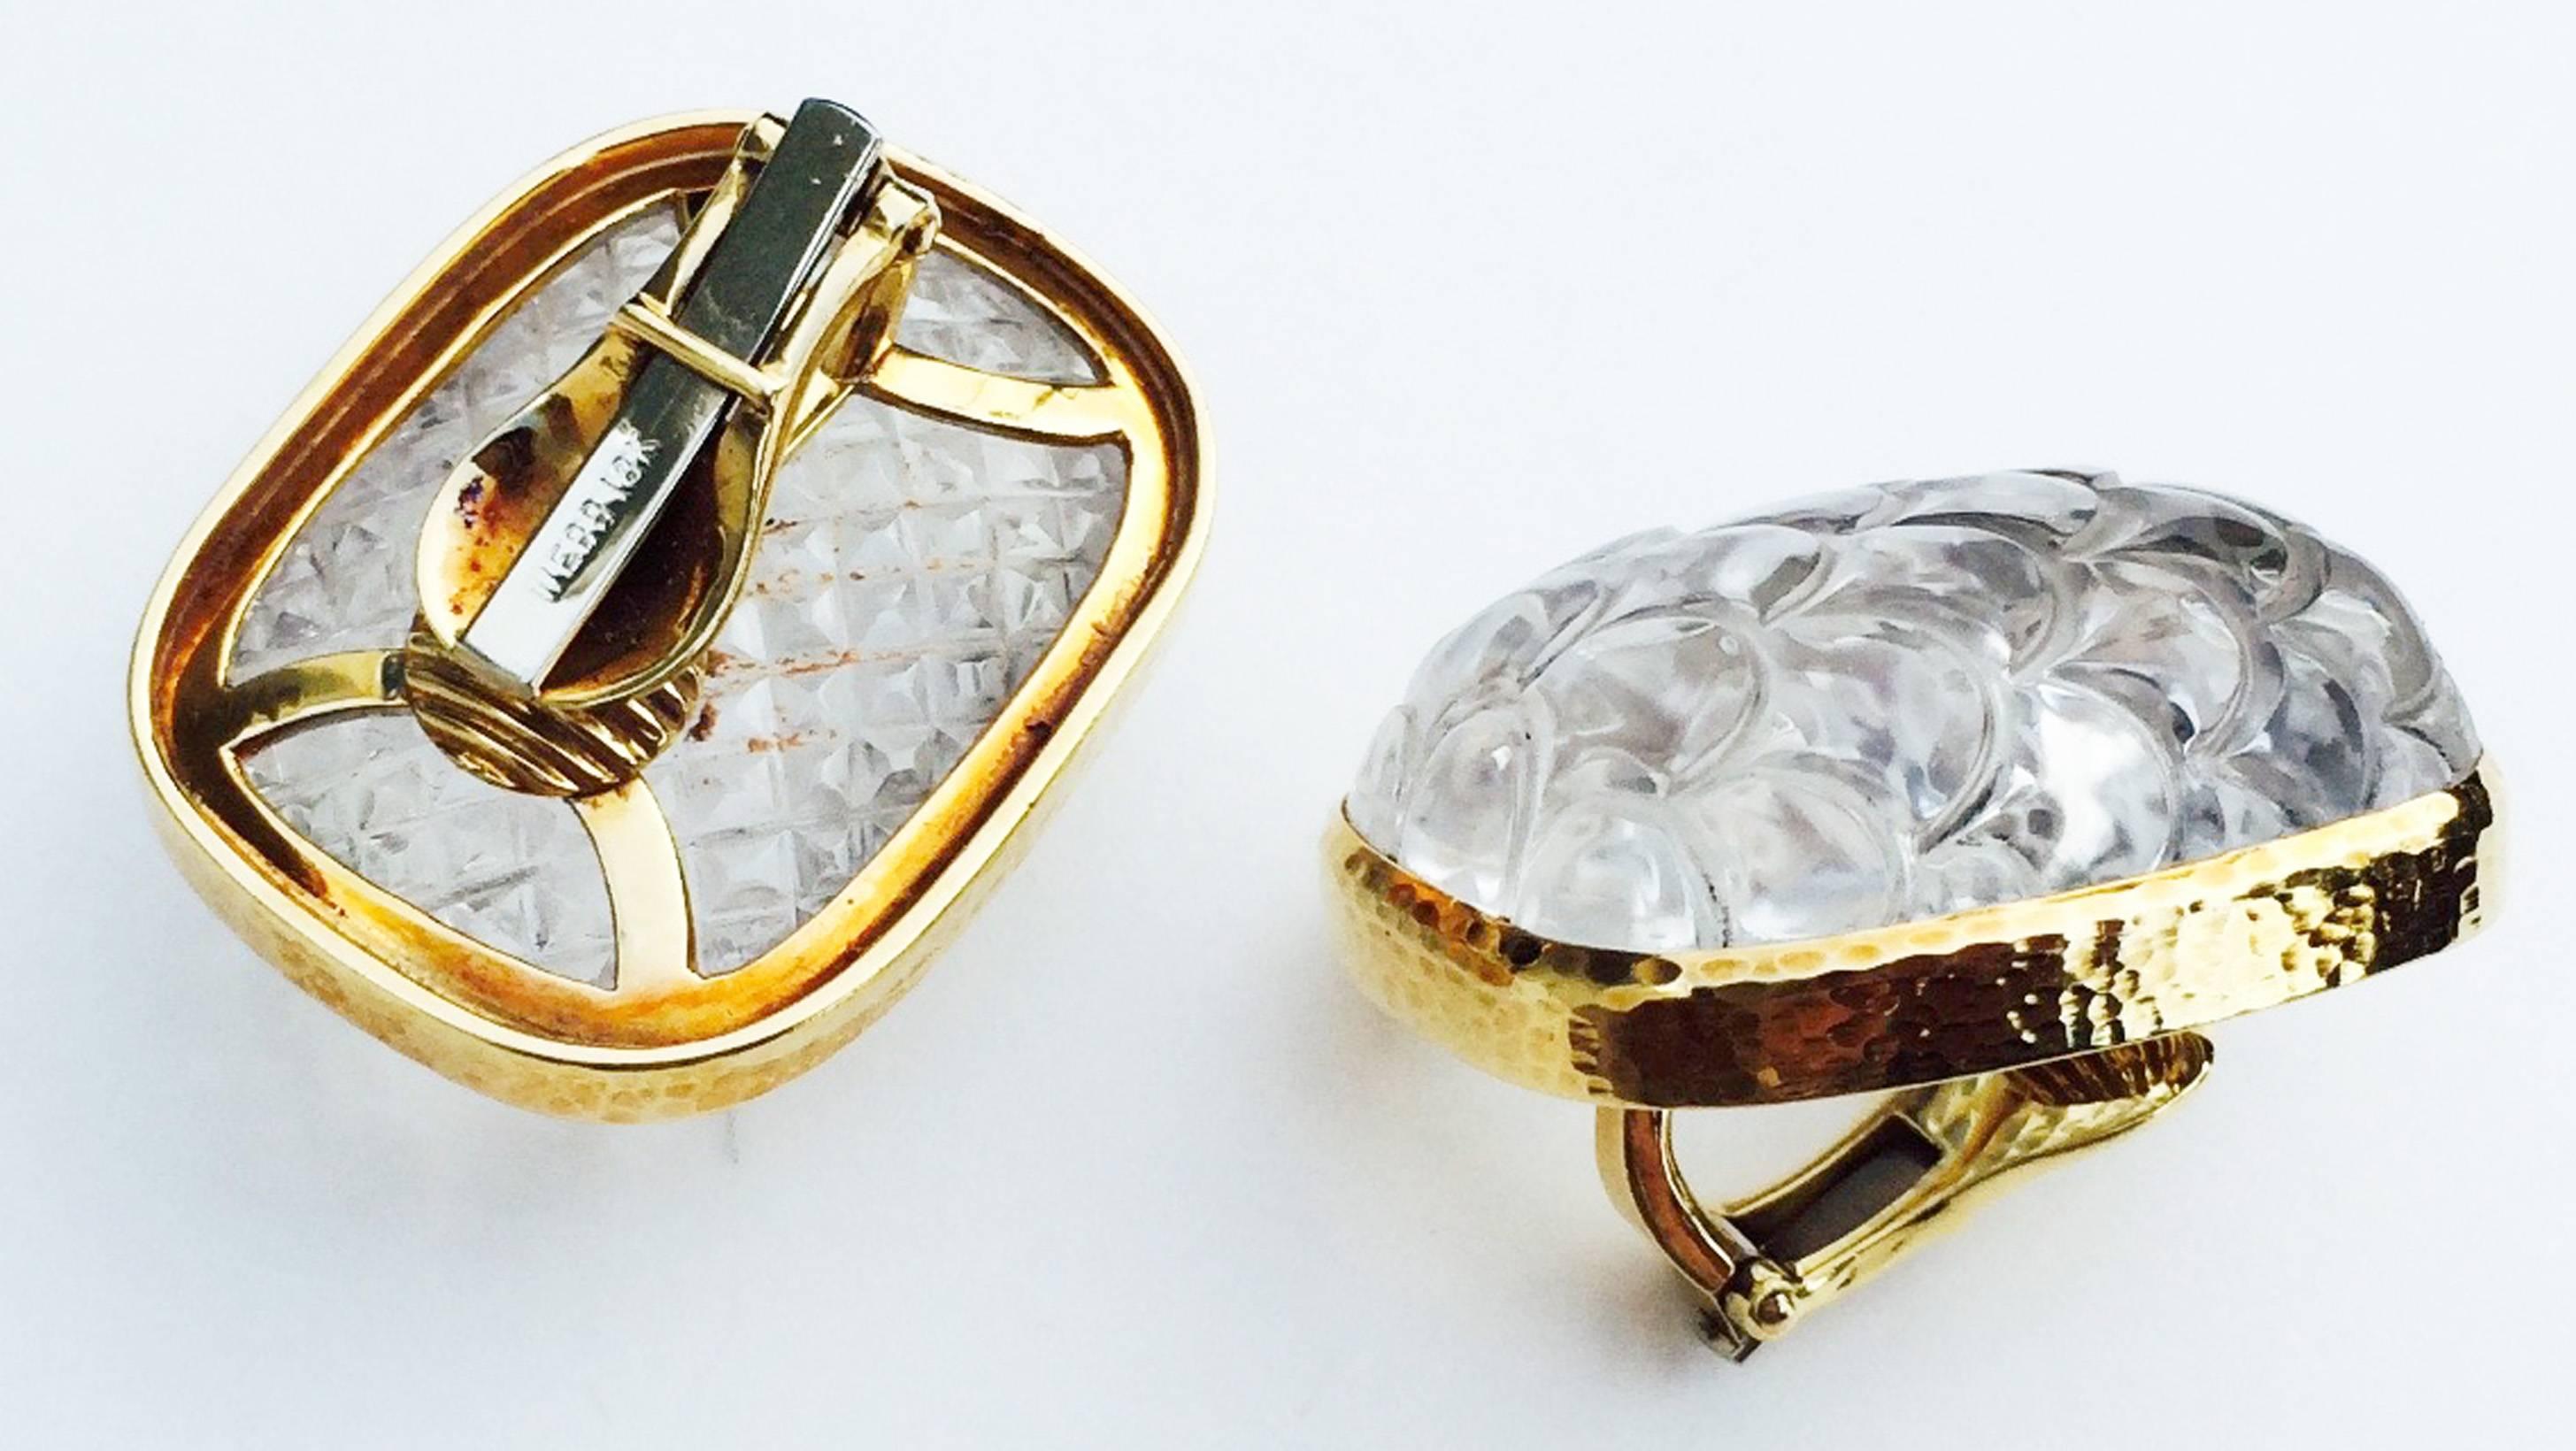 A fine pair David Webb rock crystal ear clips. Large signed hammered yellow gold items feature bezel mounted carved rock crystal centers. Original clip backs intact. Excellent with no issues.